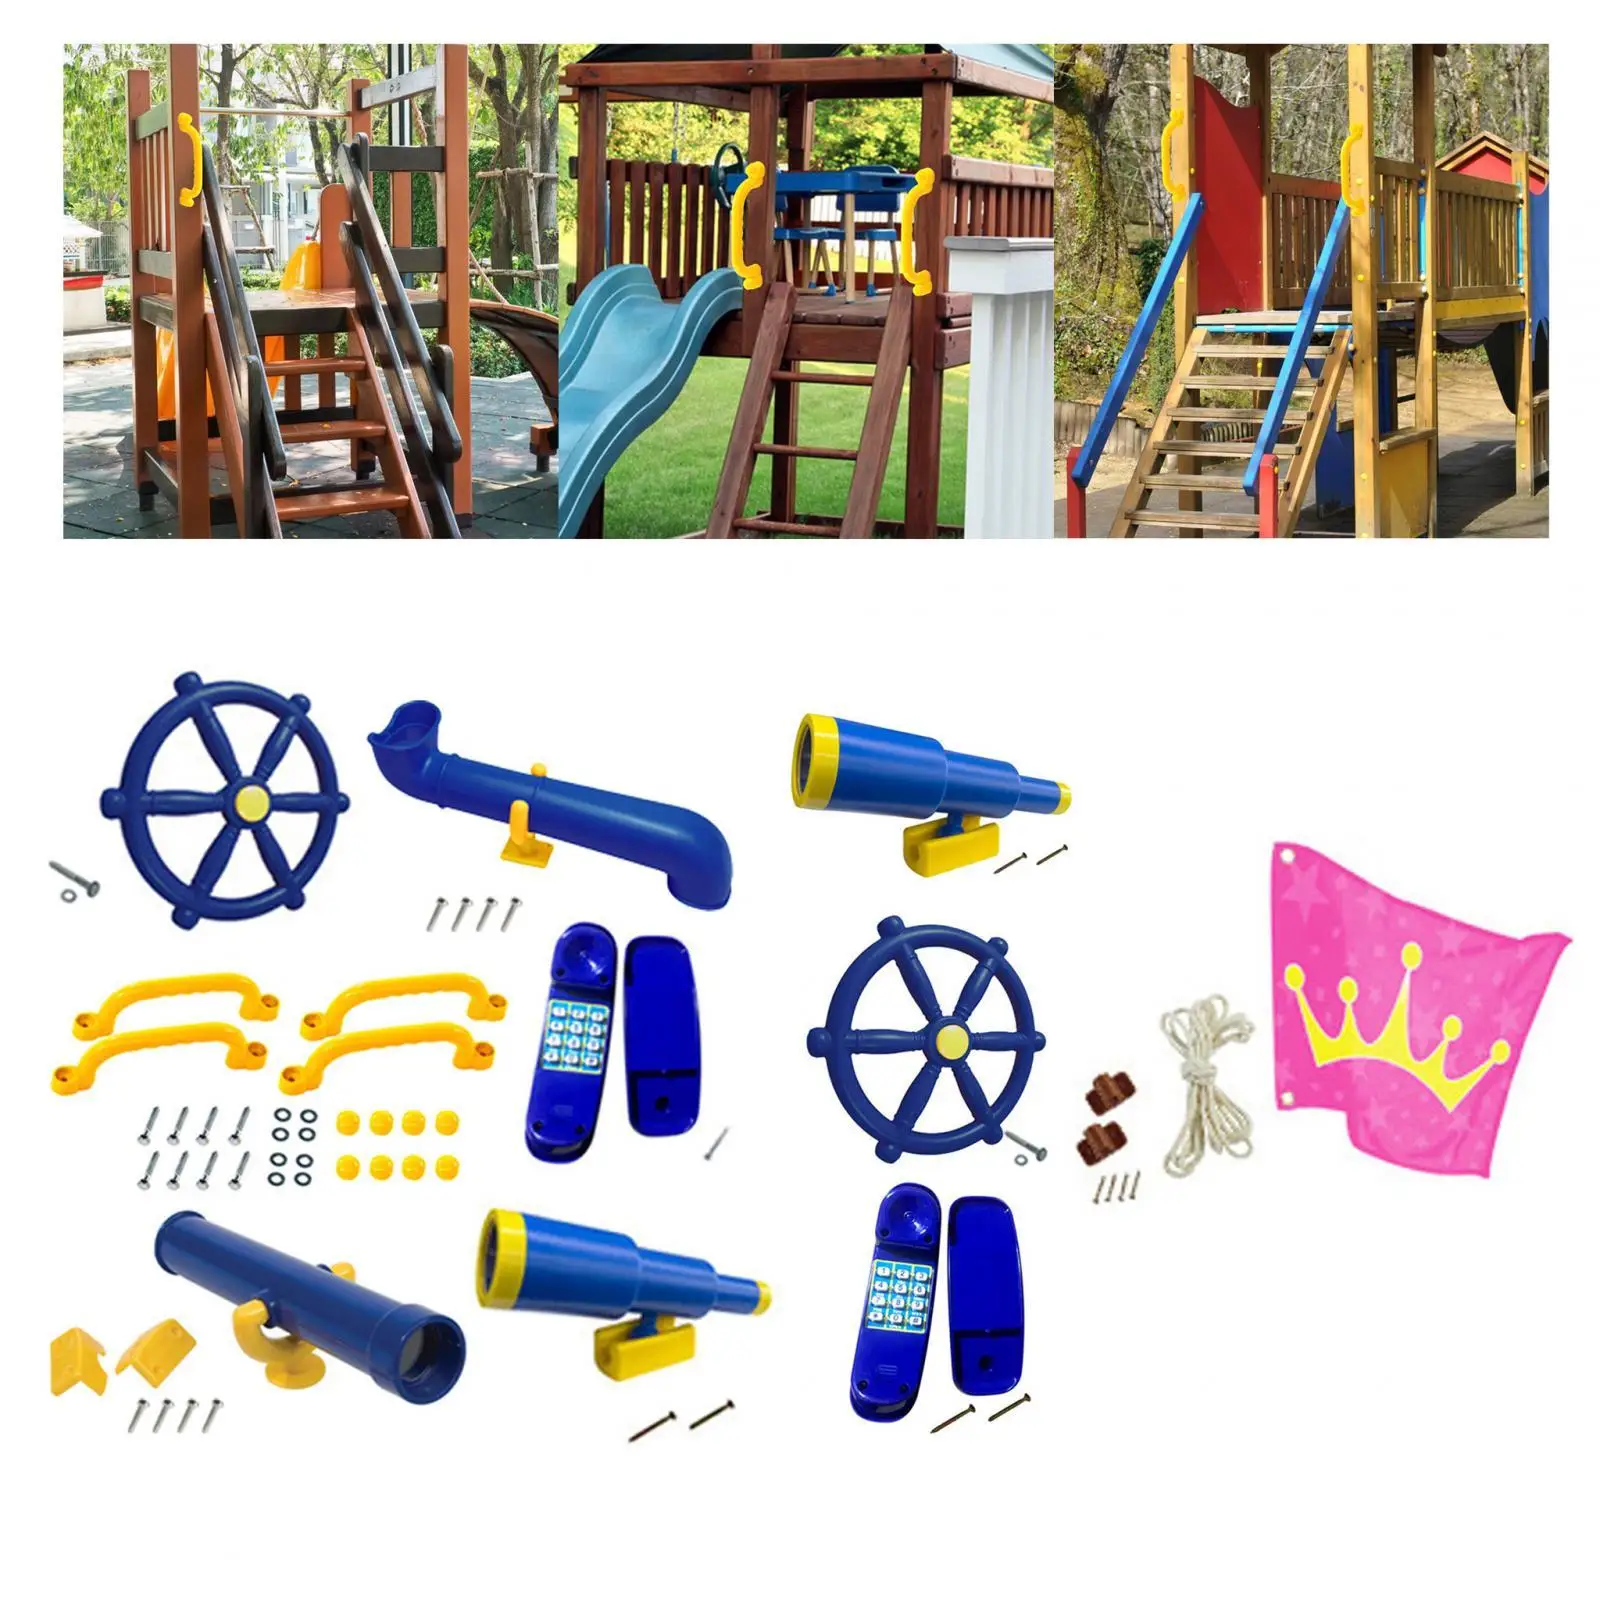 Playground Equipment Sports Toy Accessories Swing Playground Accessories for Backyard Playhouse Swingset Treehouse Gifts